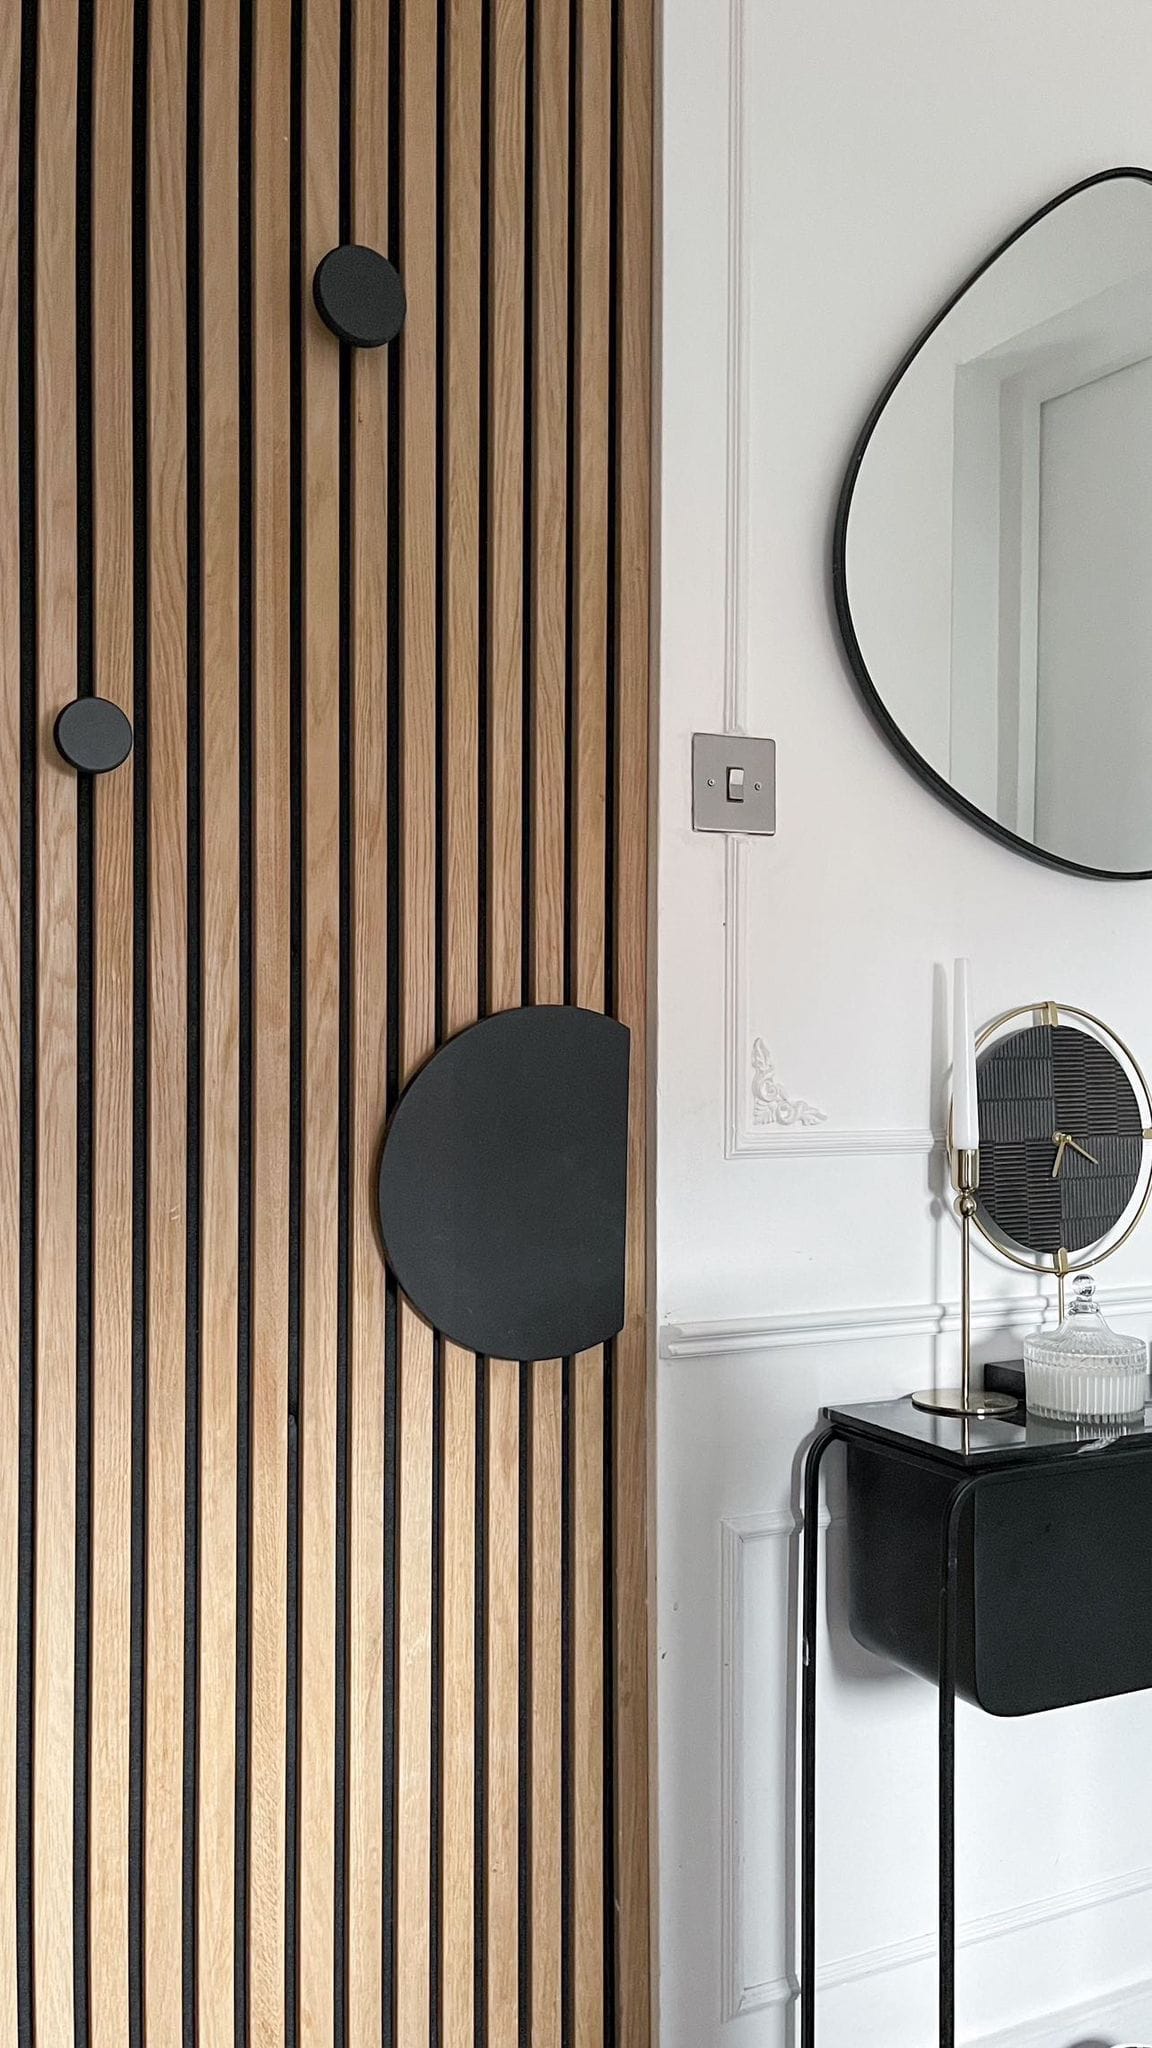 Transform White Doors with Acoustic Panels and Creative Handles